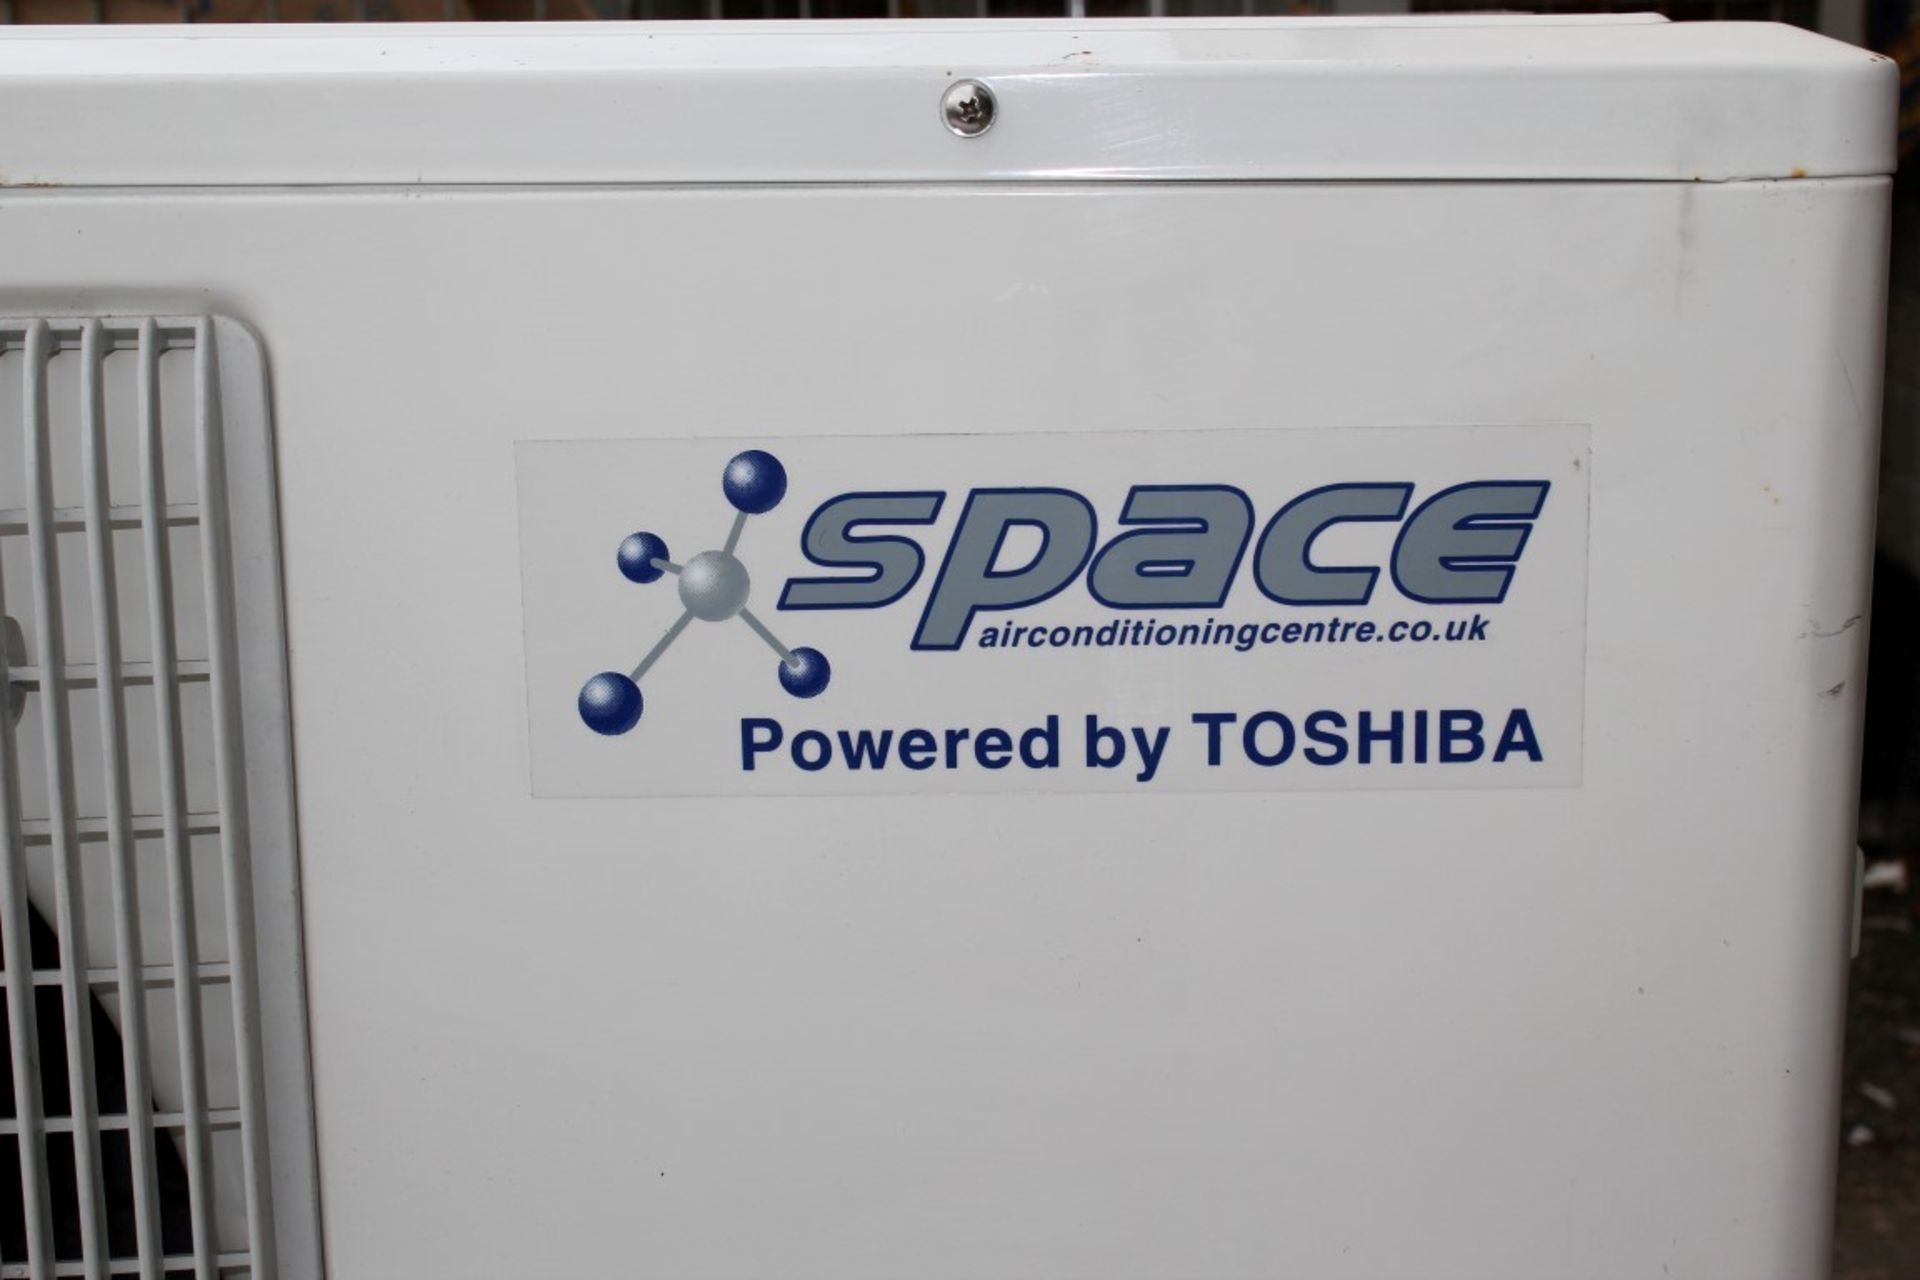 1 x TOSHIBA compressor KFR66GW - Easy Install Split Air Conditioning System With Copper Fittings - - Image 2 of 15